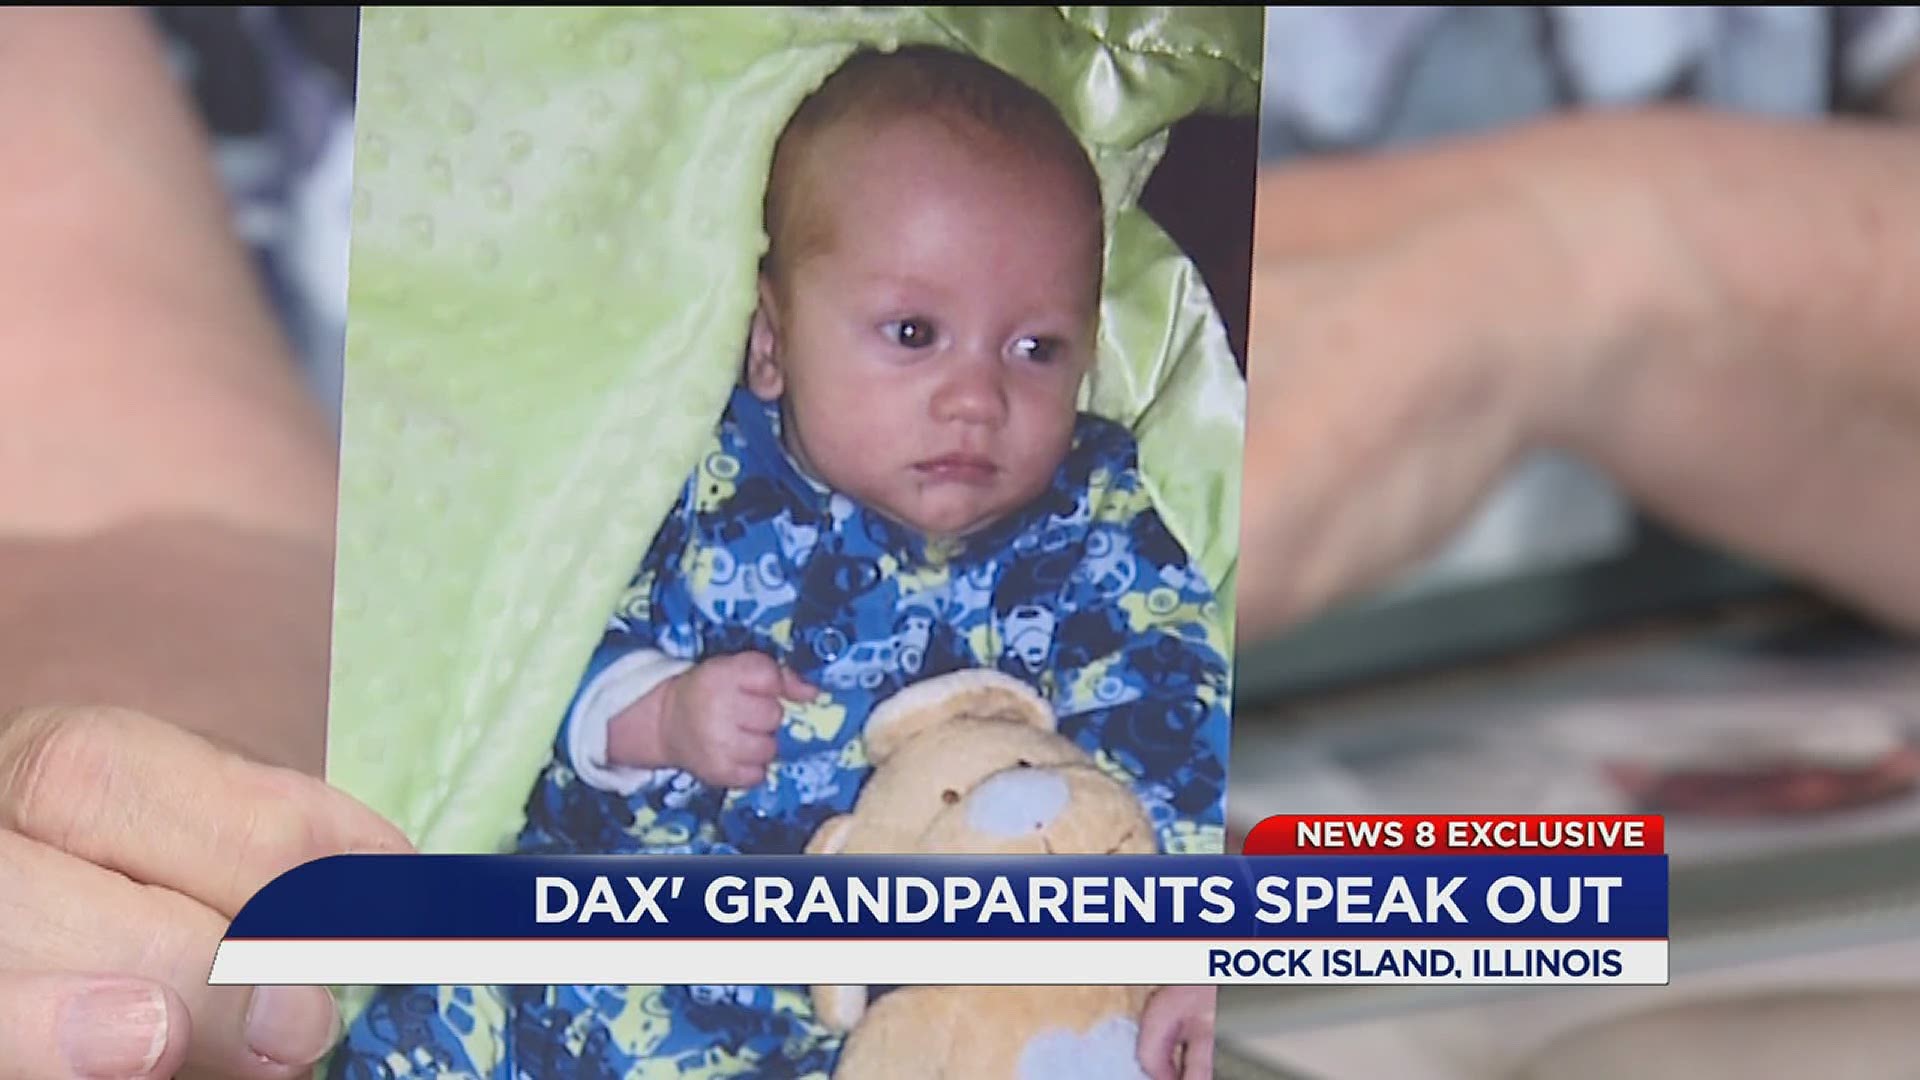 Baby Dax's grandparents say they aren't getting  answers on Nathaniel Onsrud's whereabouts. He was set free after his murder conviction was vacated on Tuesday.